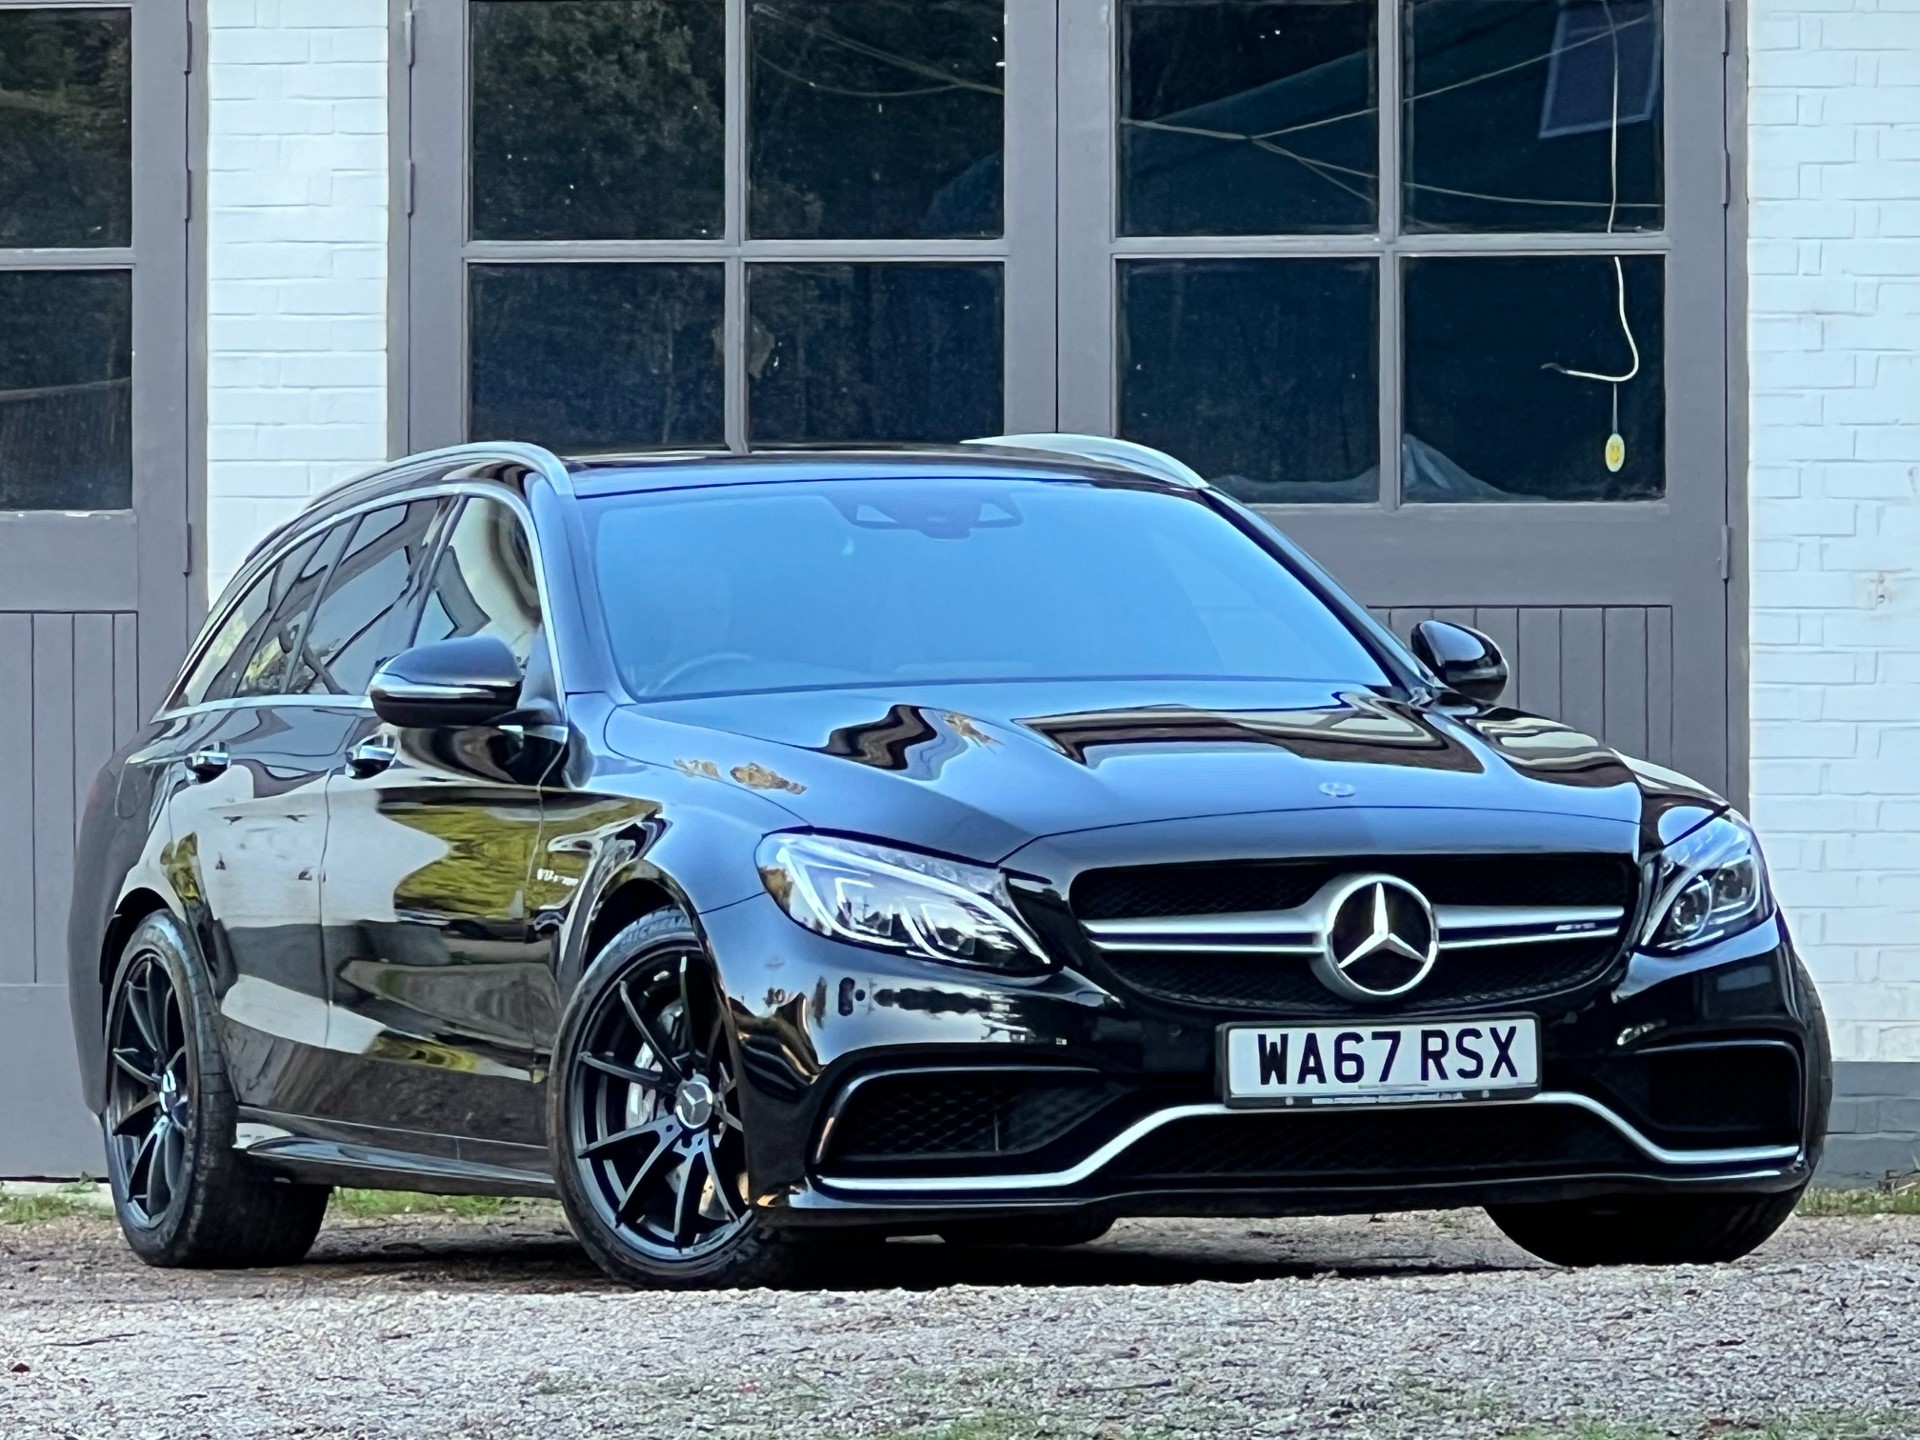 Used Mercedes C63 Amg For Sale In Petworth, West Sussex | West Sussex  Specialist Cars